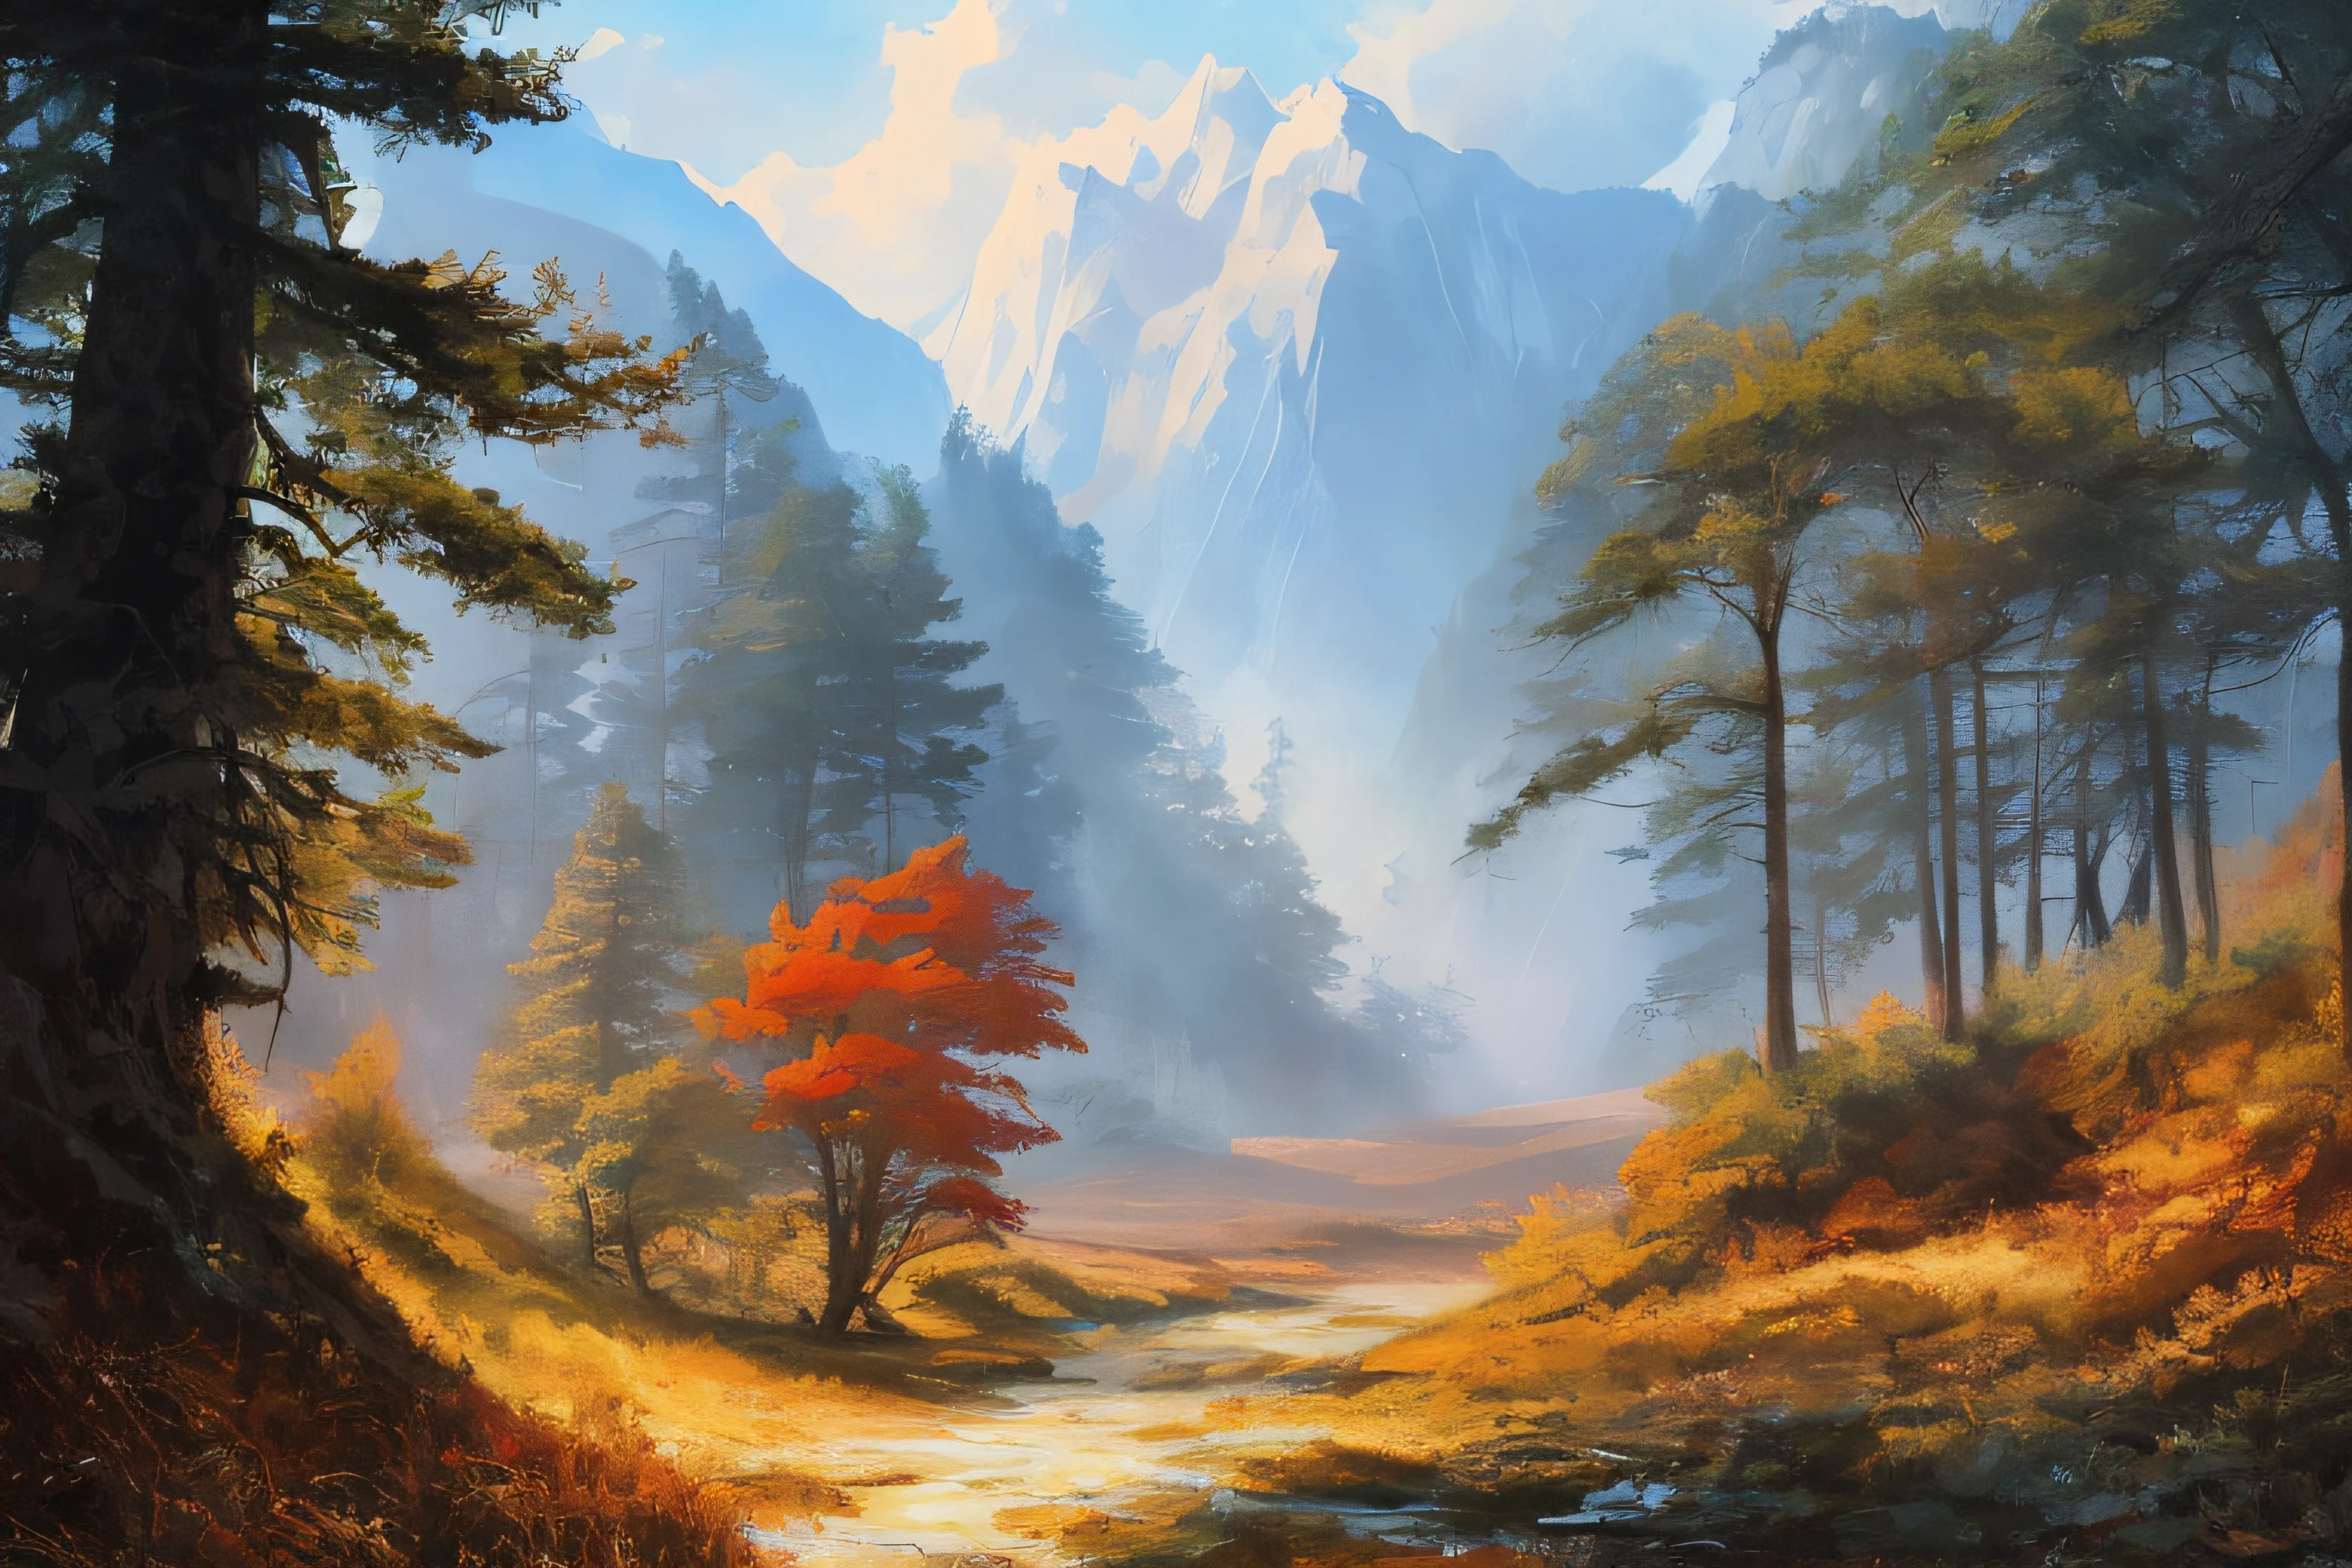 samdoesarts style. physical palette knife painting, thick Oil paint, stunning landscape, vast scale, soft colors, muted contrast, extremely detailed and intricate. 
Forrest landscape, God rays, sharp focus